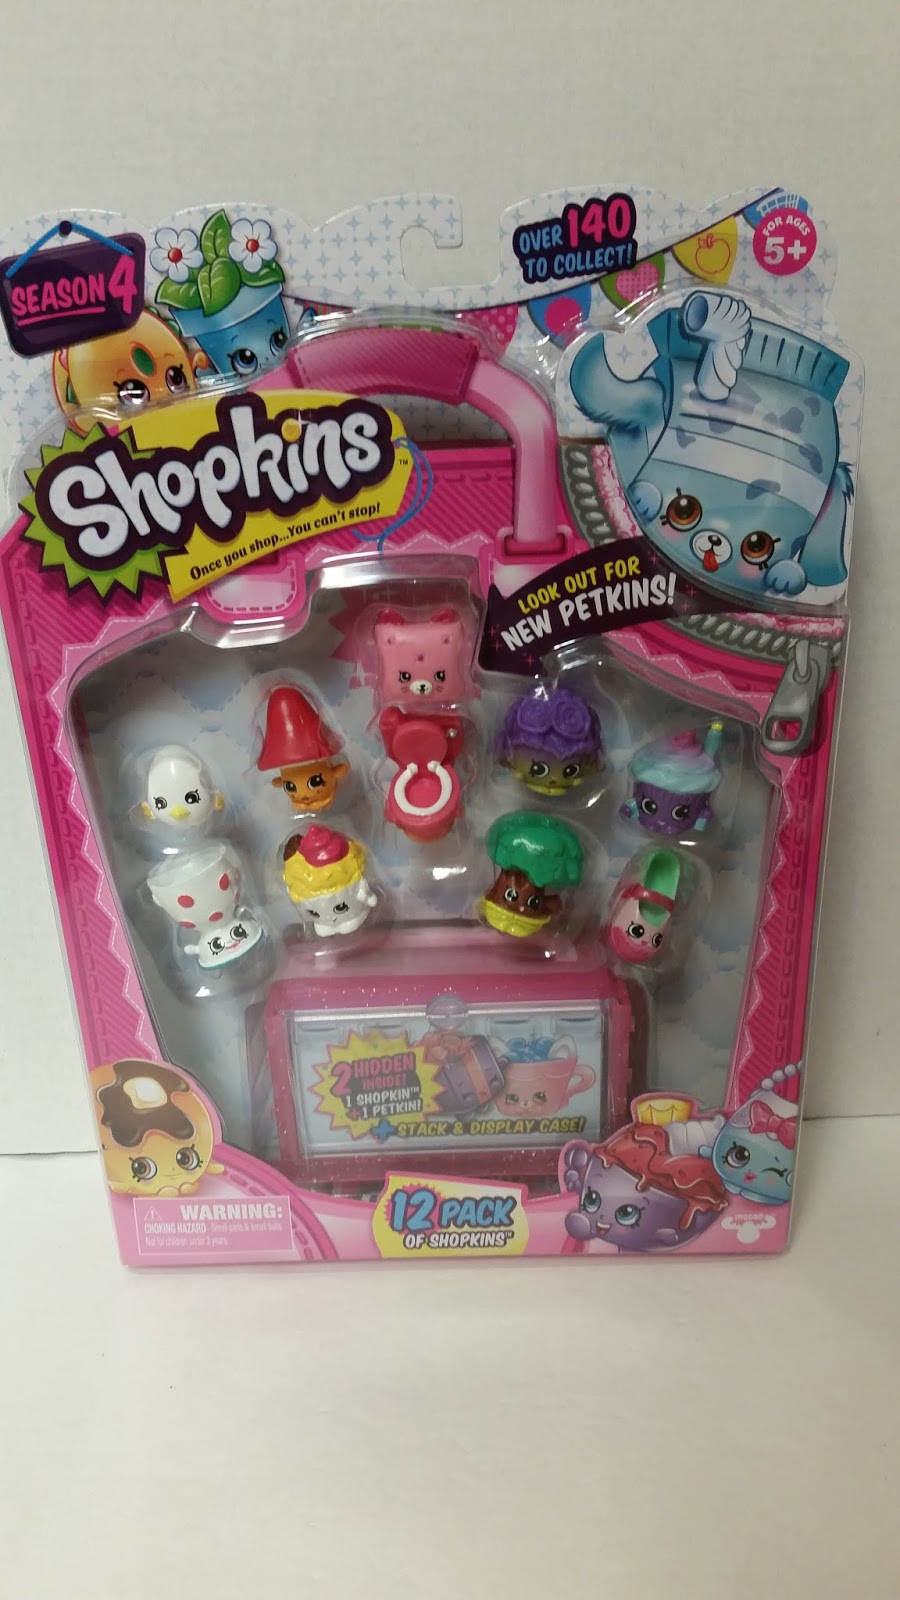 Never Grow Up: A Mom's Guide Dolls and More: Shopkins Season 4 and Happy Meal Toys